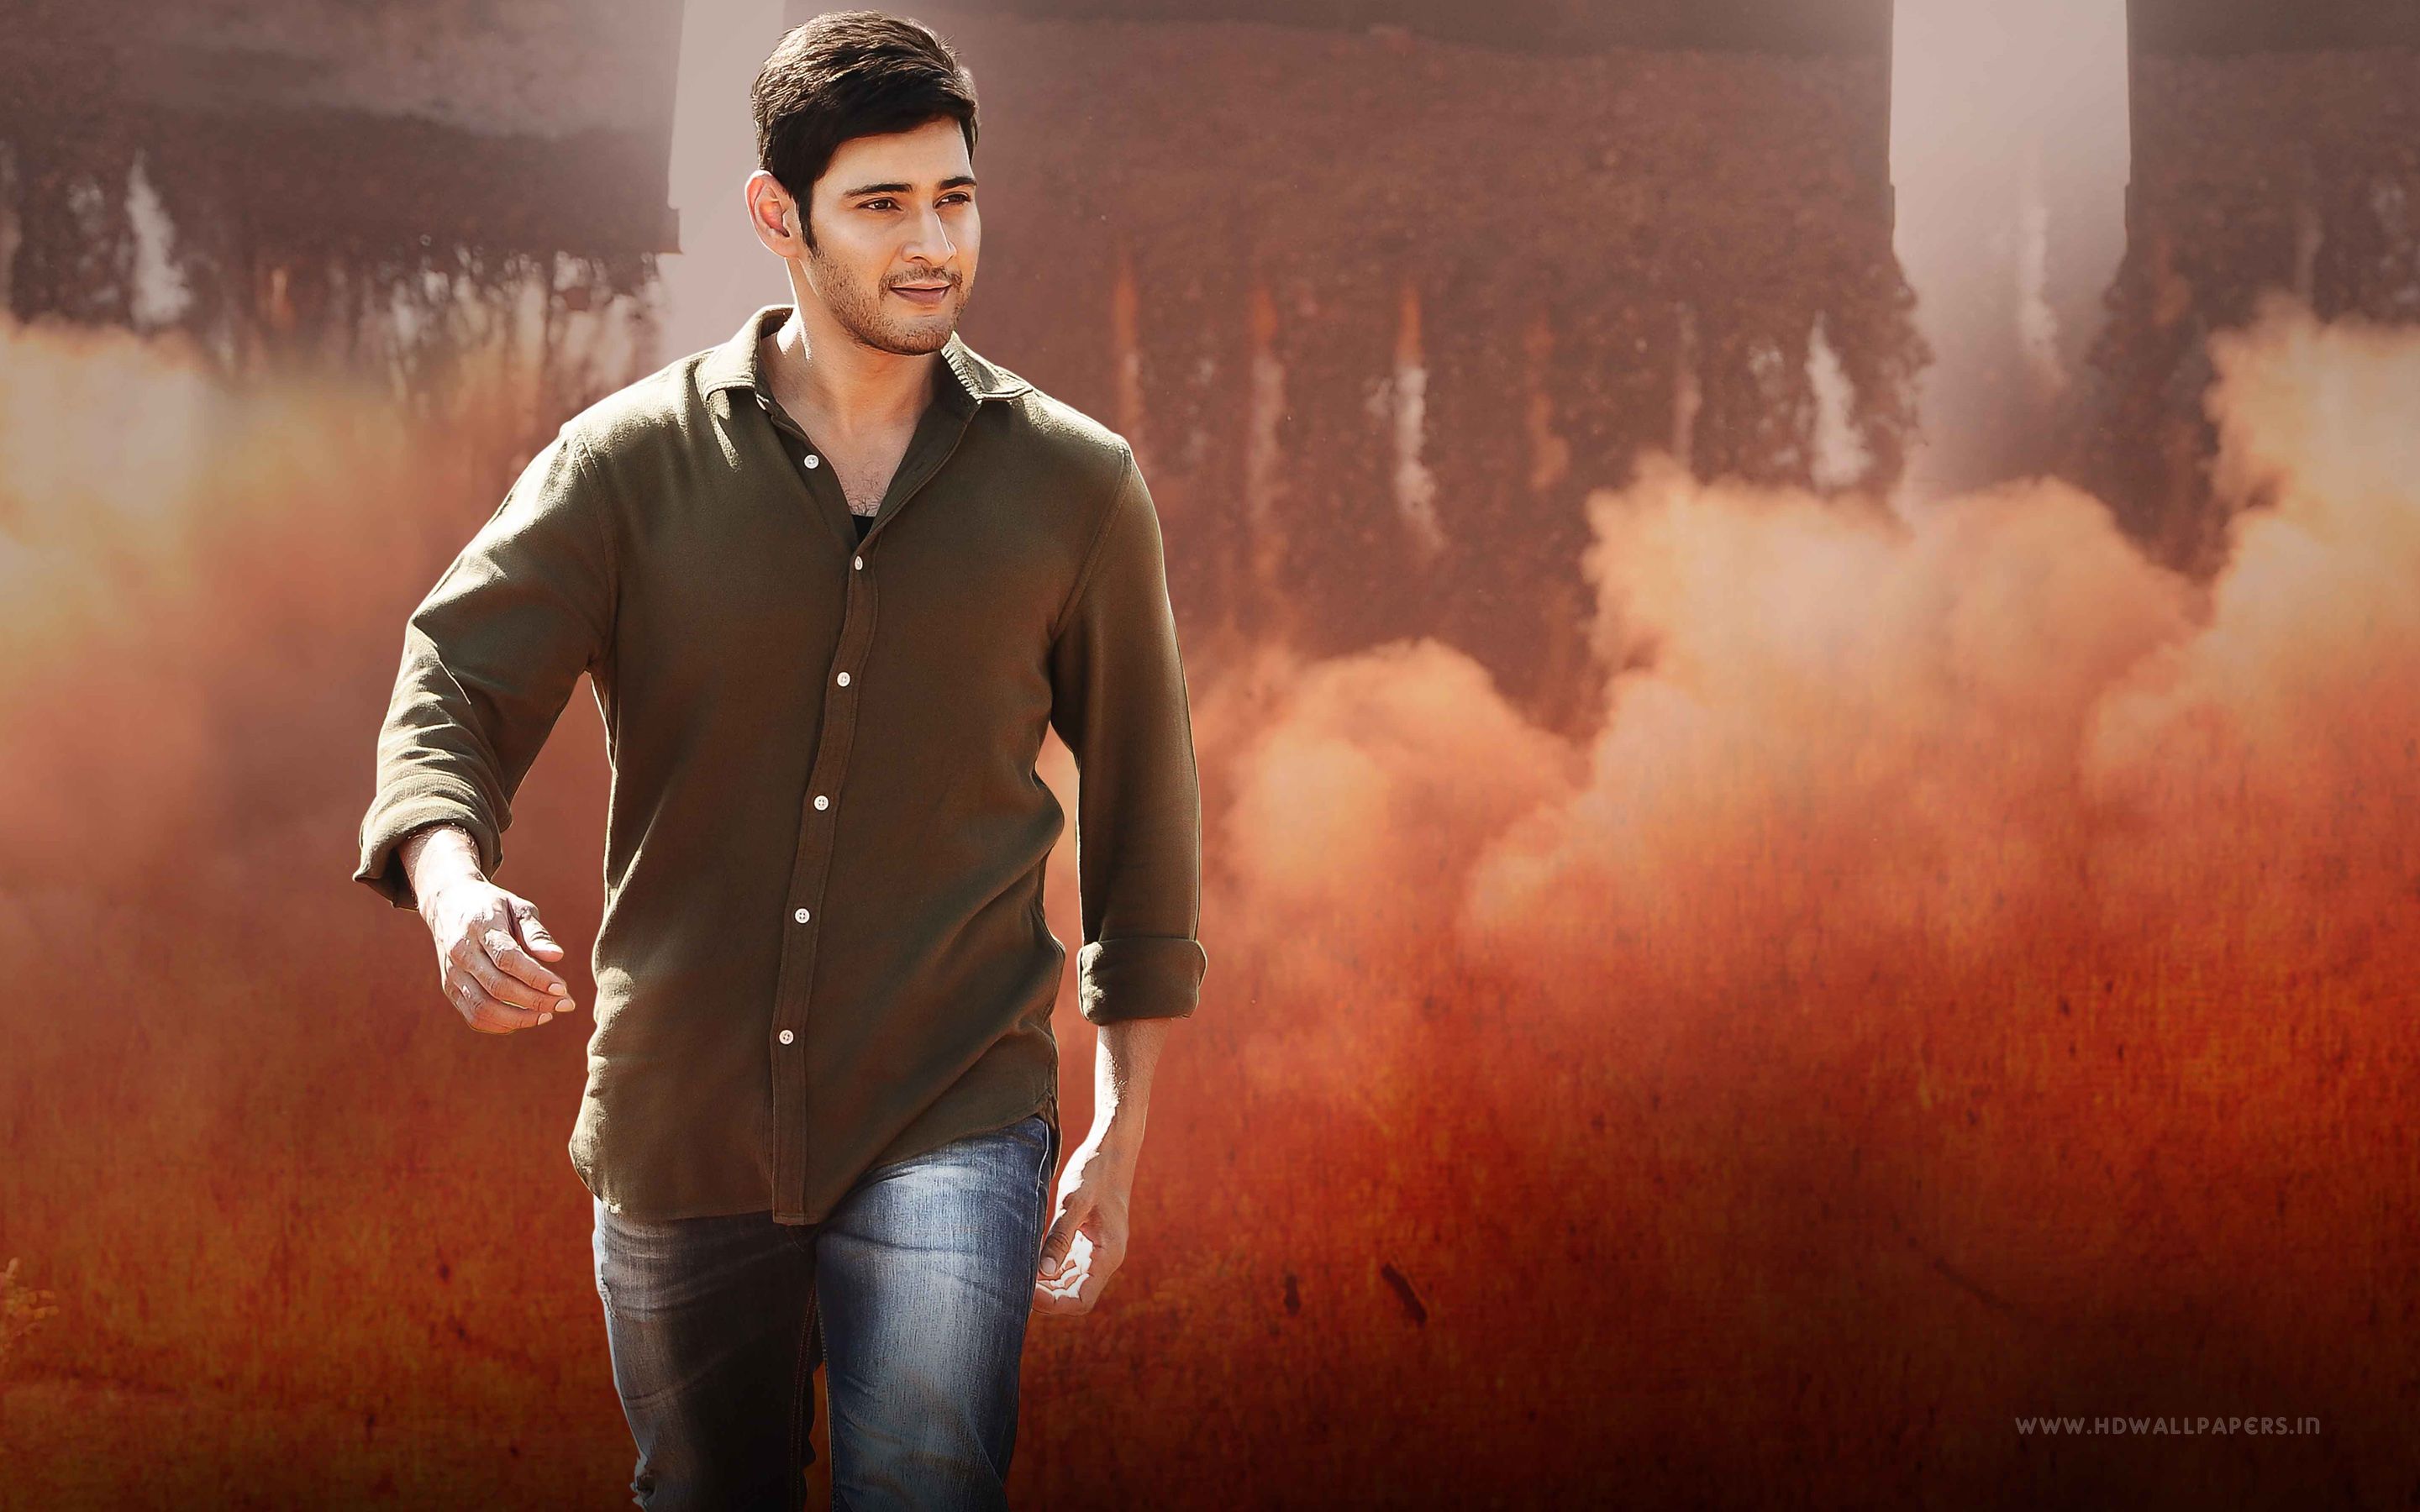 Srimanthudu 4K wallpaper for your desktop or mobile screen free and easy to download